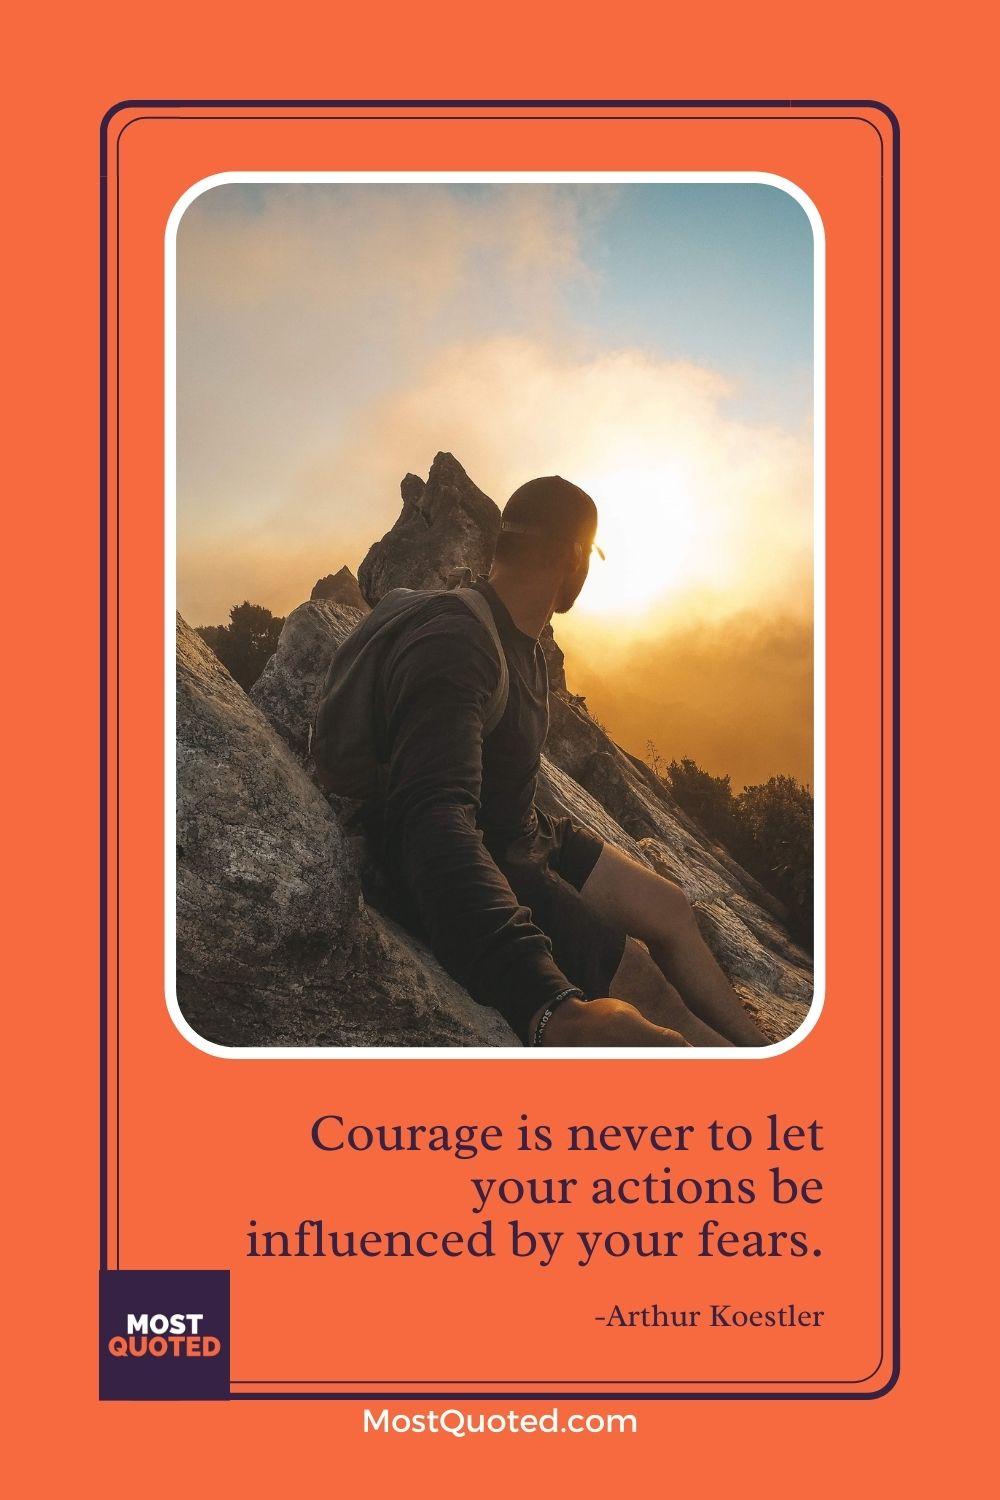 Courage is never to let your actions be influenced by your fears. - Arthur Koestler